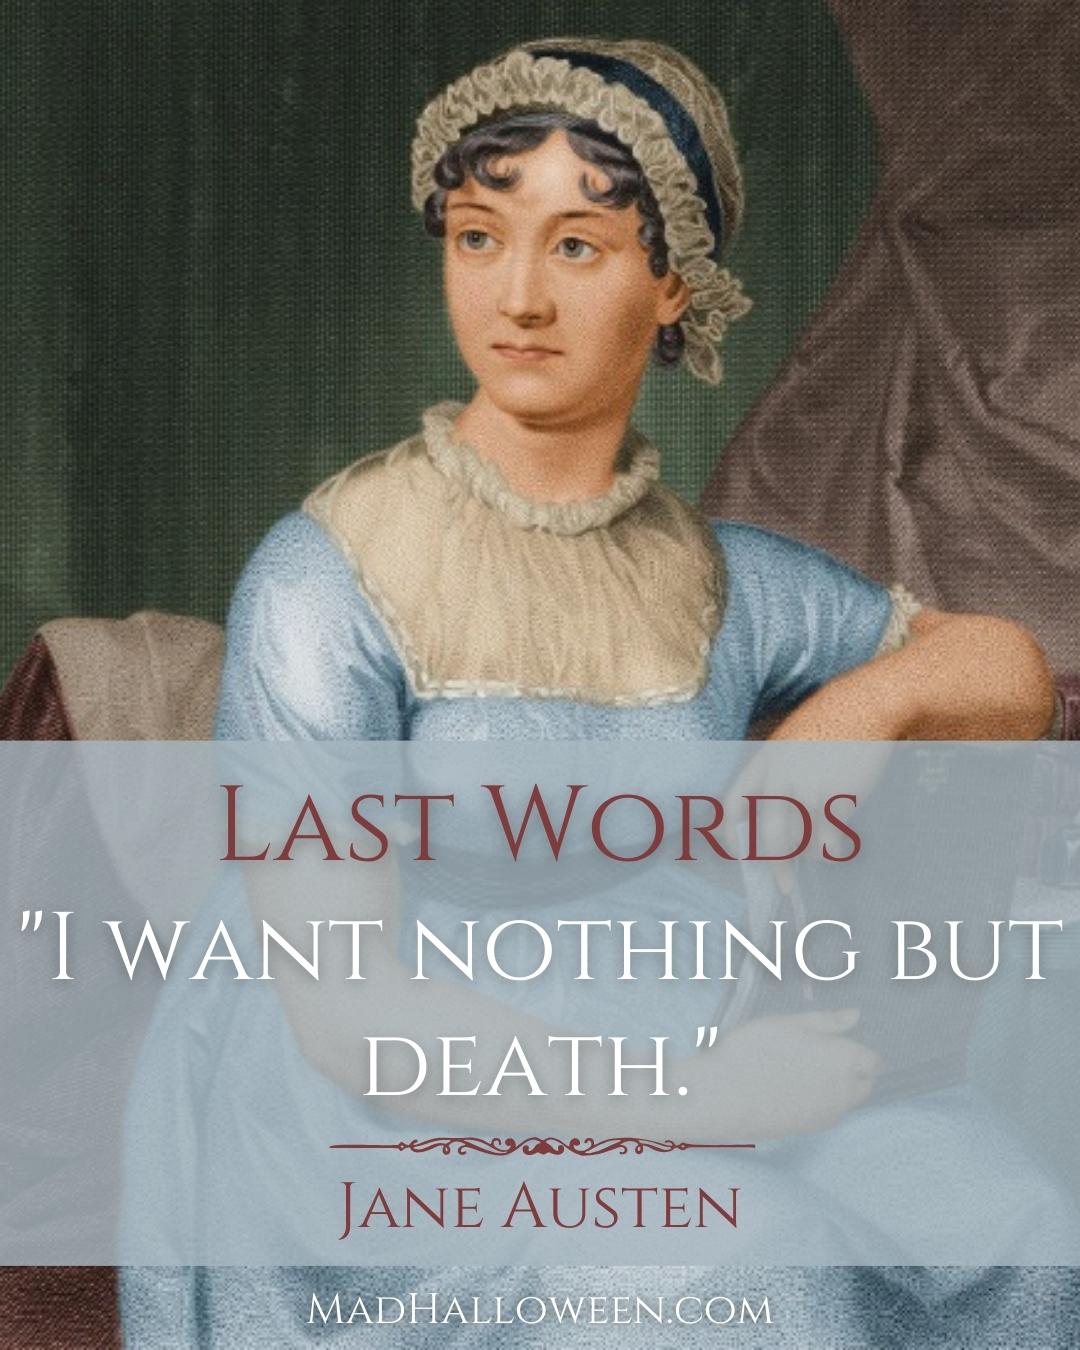 Famous Last Words Quotes of the Departed - Jane Austen - Mad Halloween